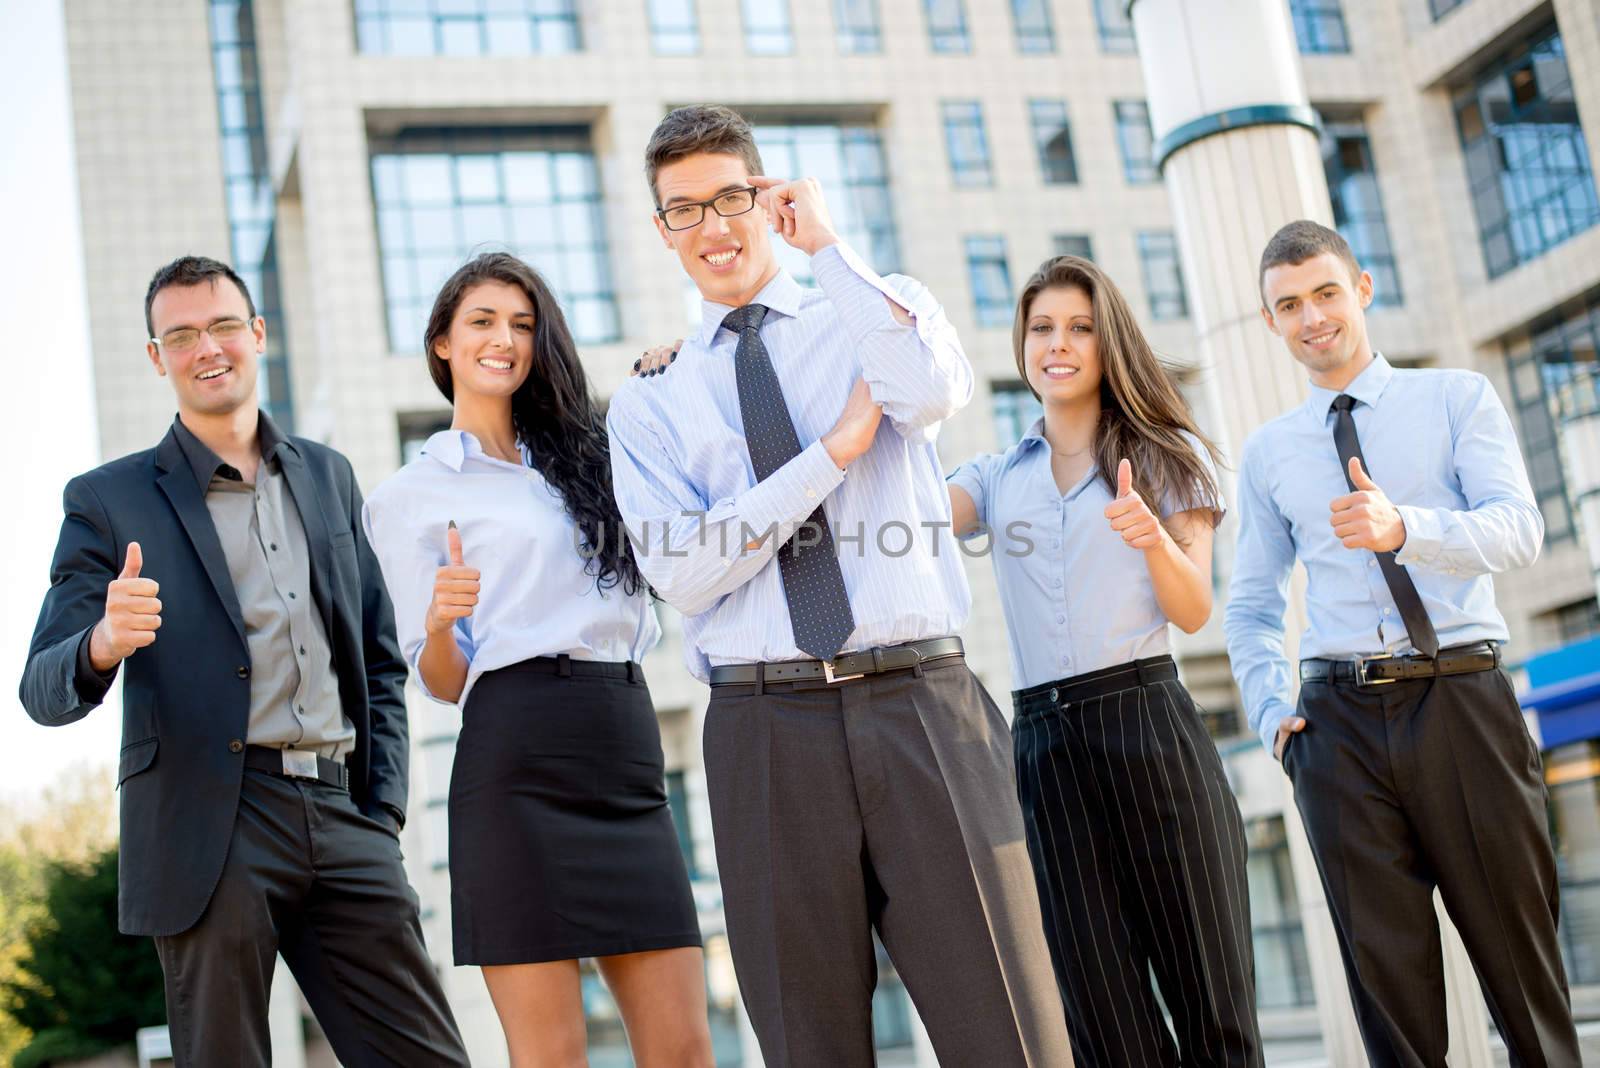 Young businessman with glasses, elegantly dressed standing outside in front of office building while behind him stands his young business team with thumbs up.